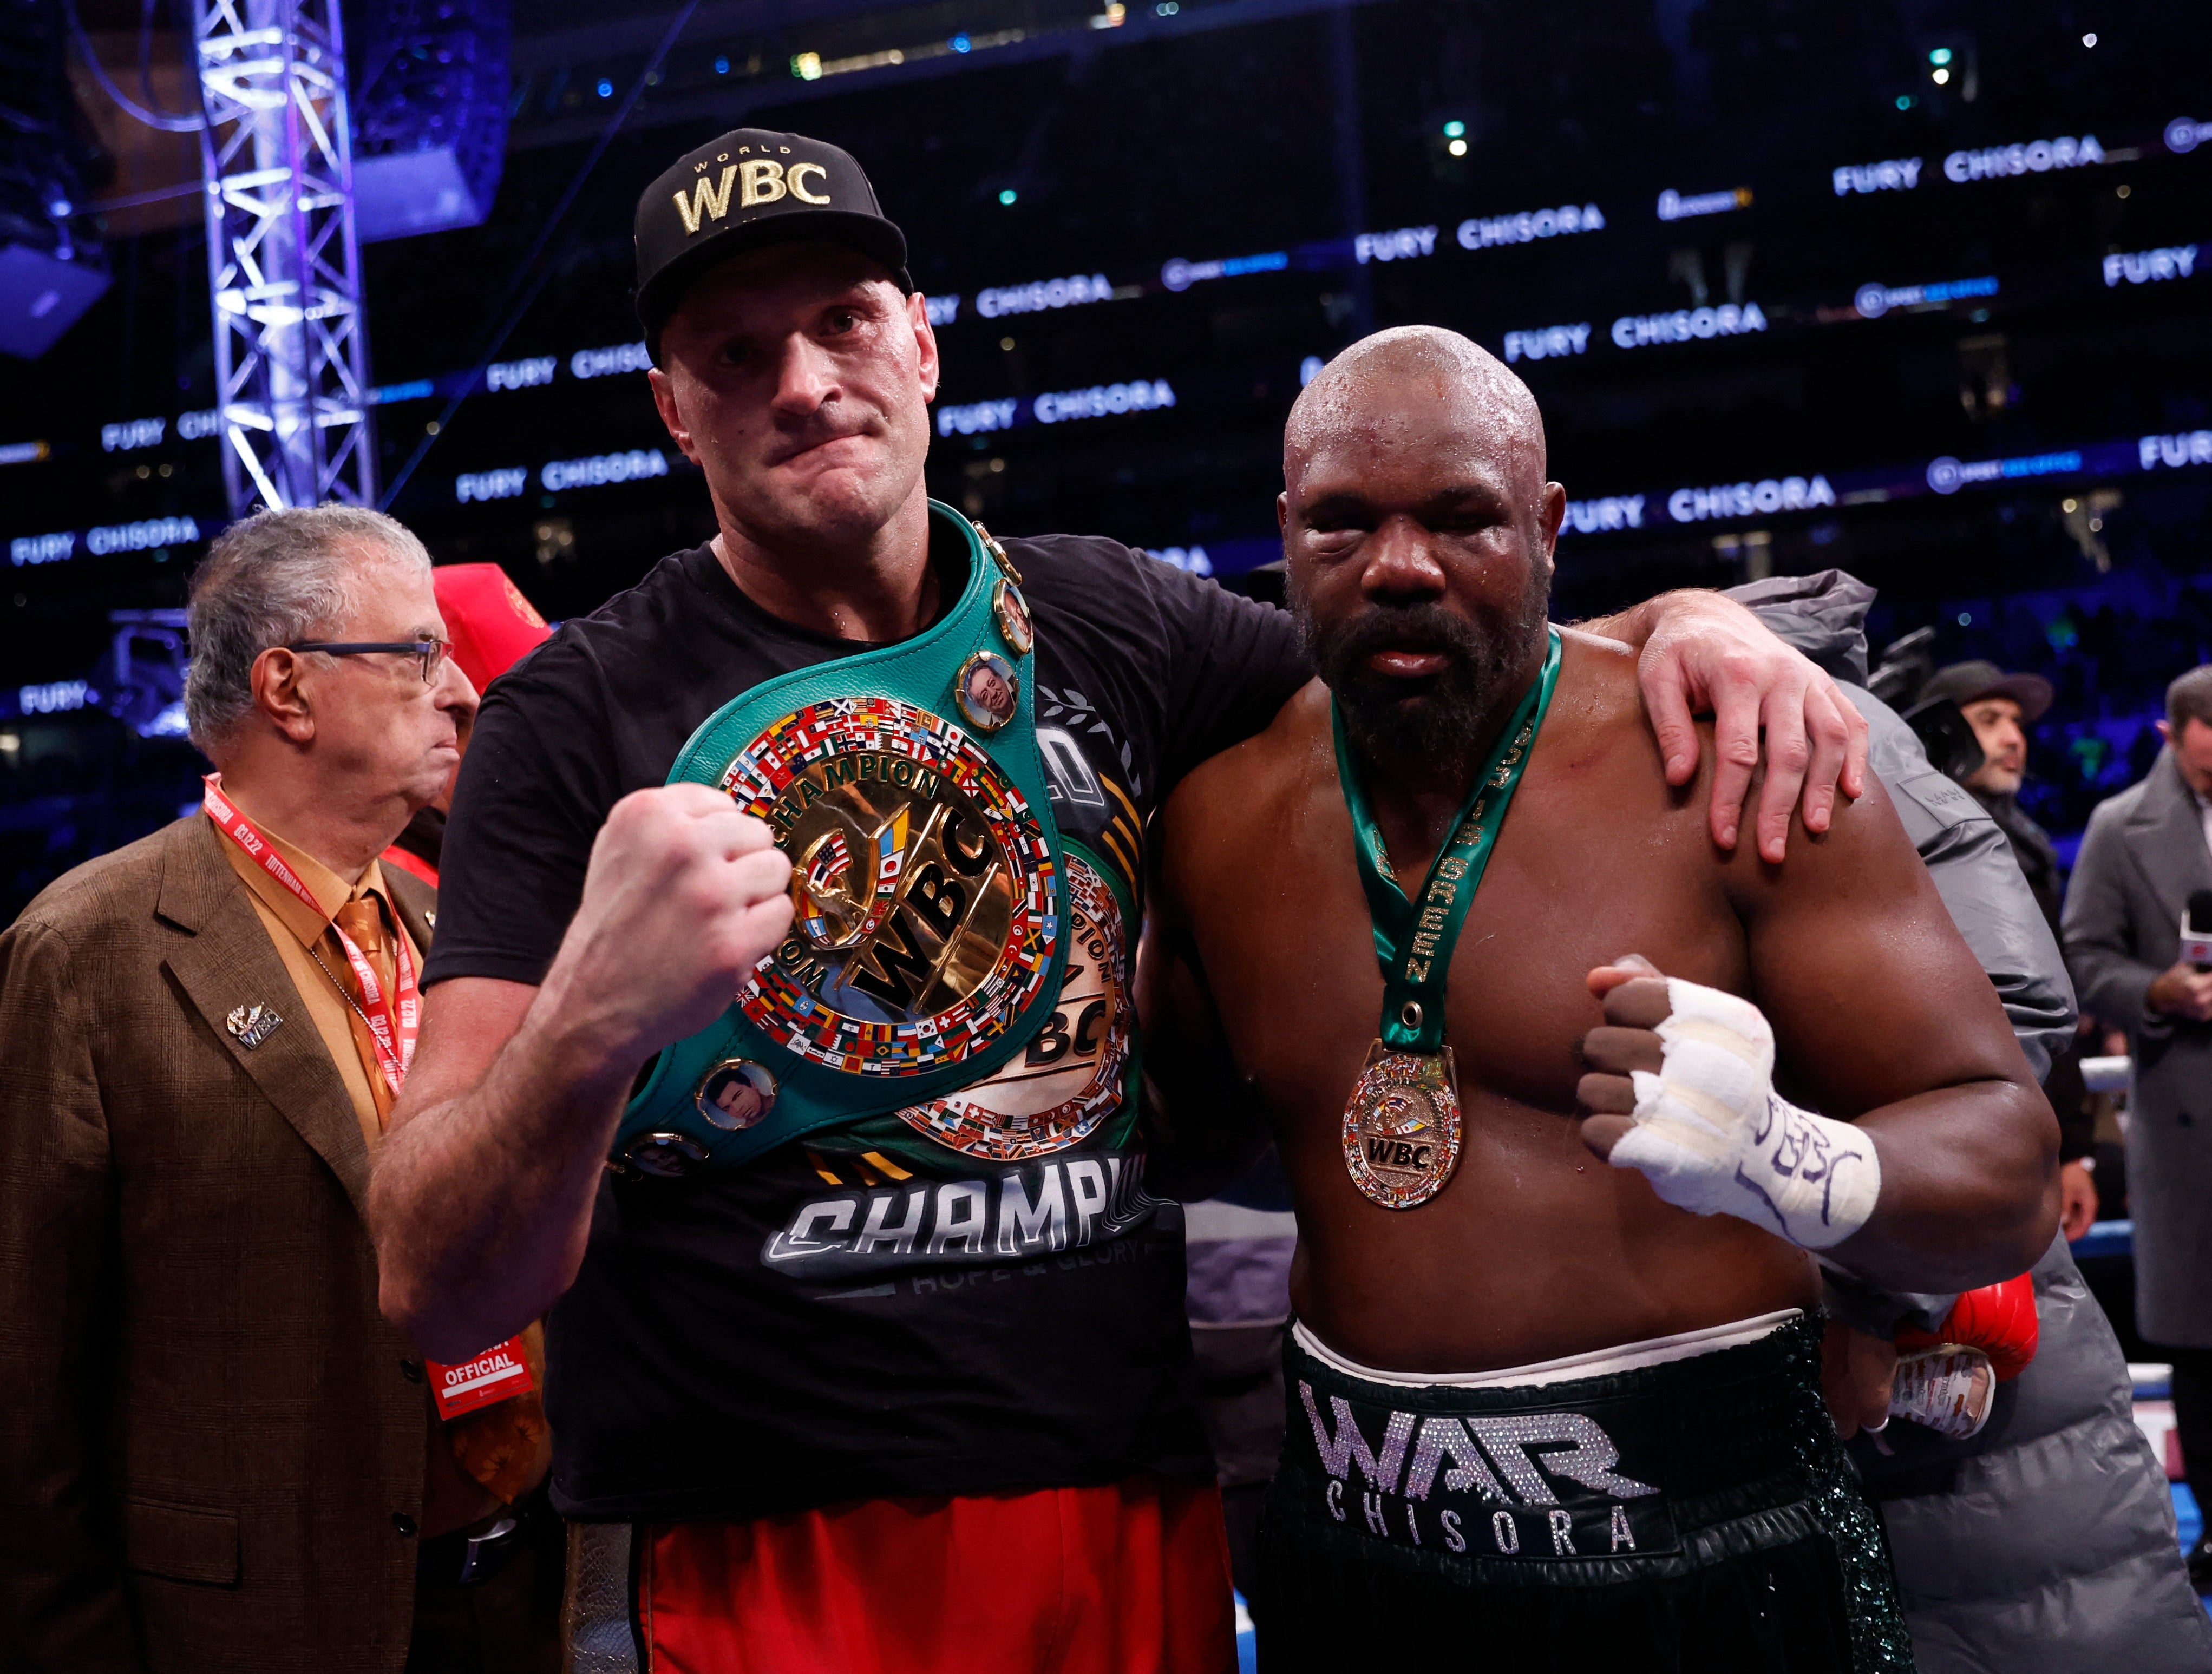 Fury and Chisora pose for a picture after their fight